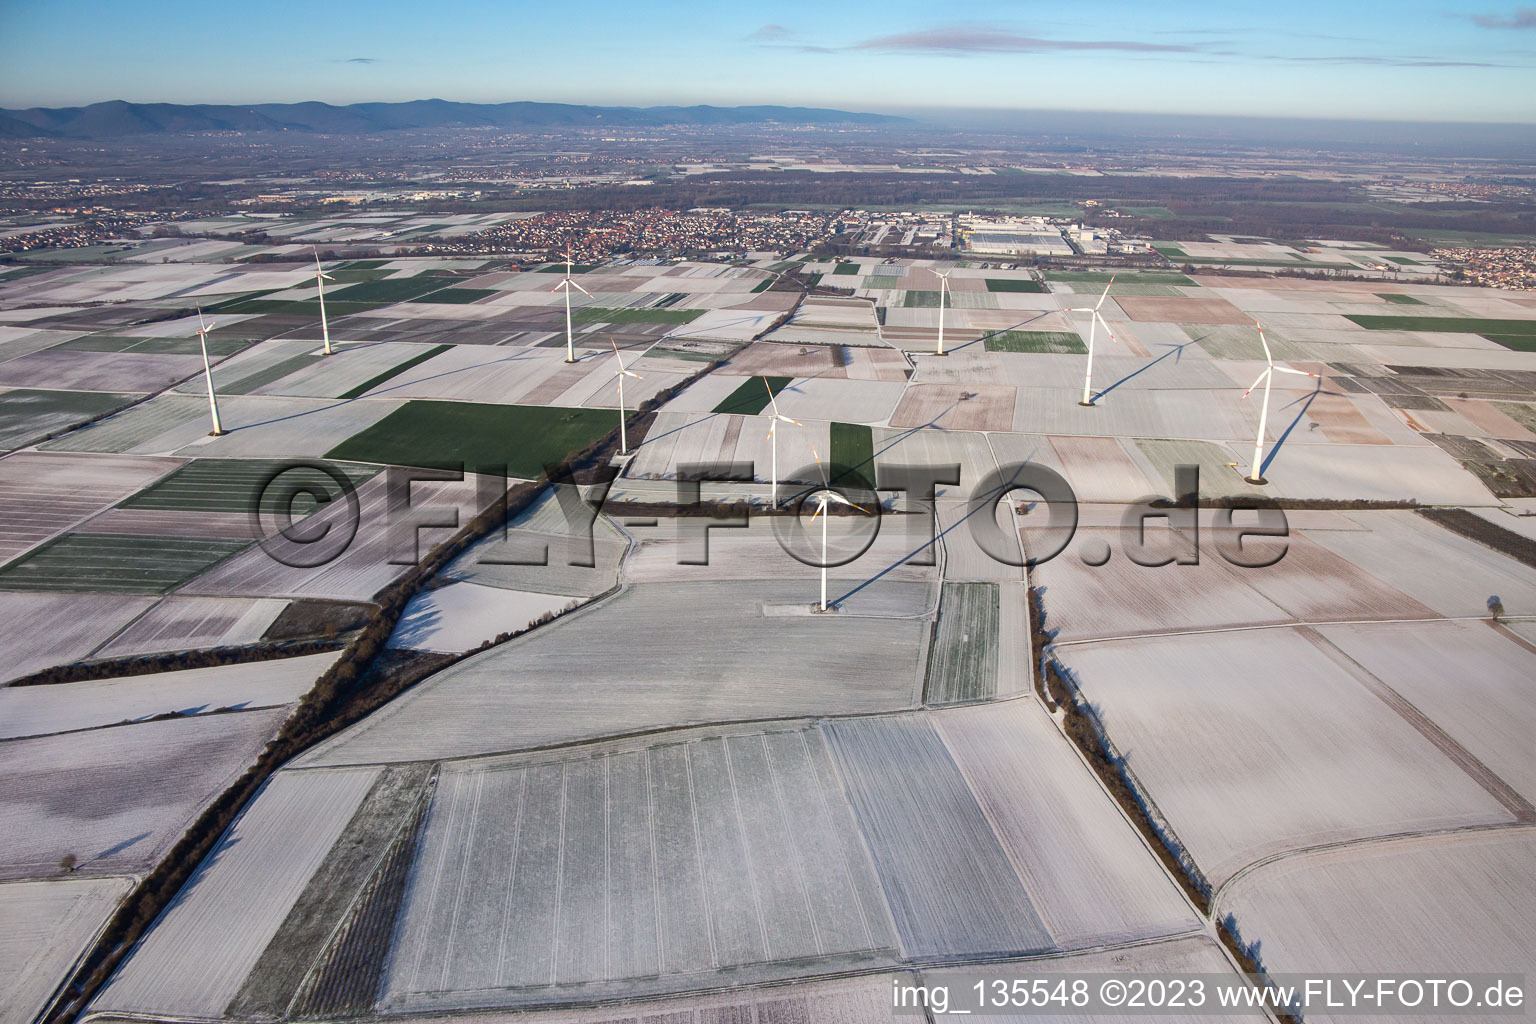 Wind farm in winter with snow in Offenbach an der Queich in the state Rhineland-Palatinate, Germany